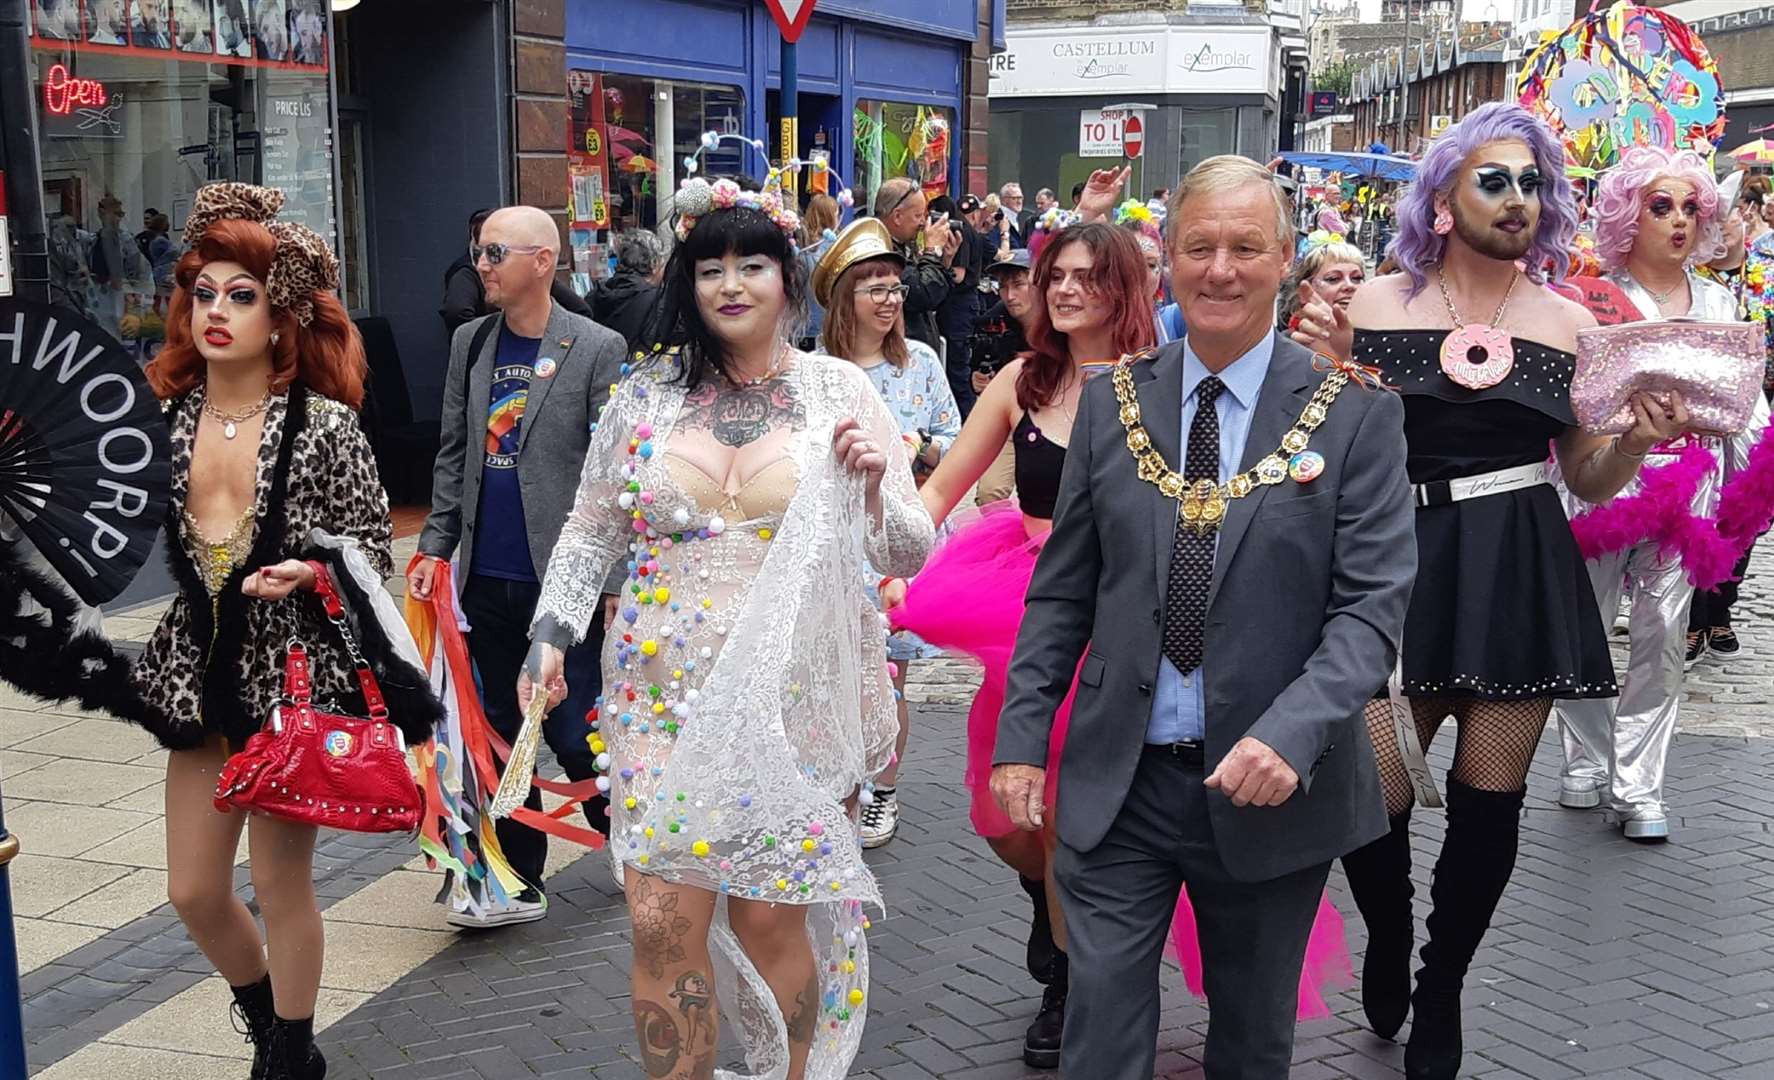 The Pride parade in Dover in August. Organisers could apply for the new grant Picture: Sam Lennon